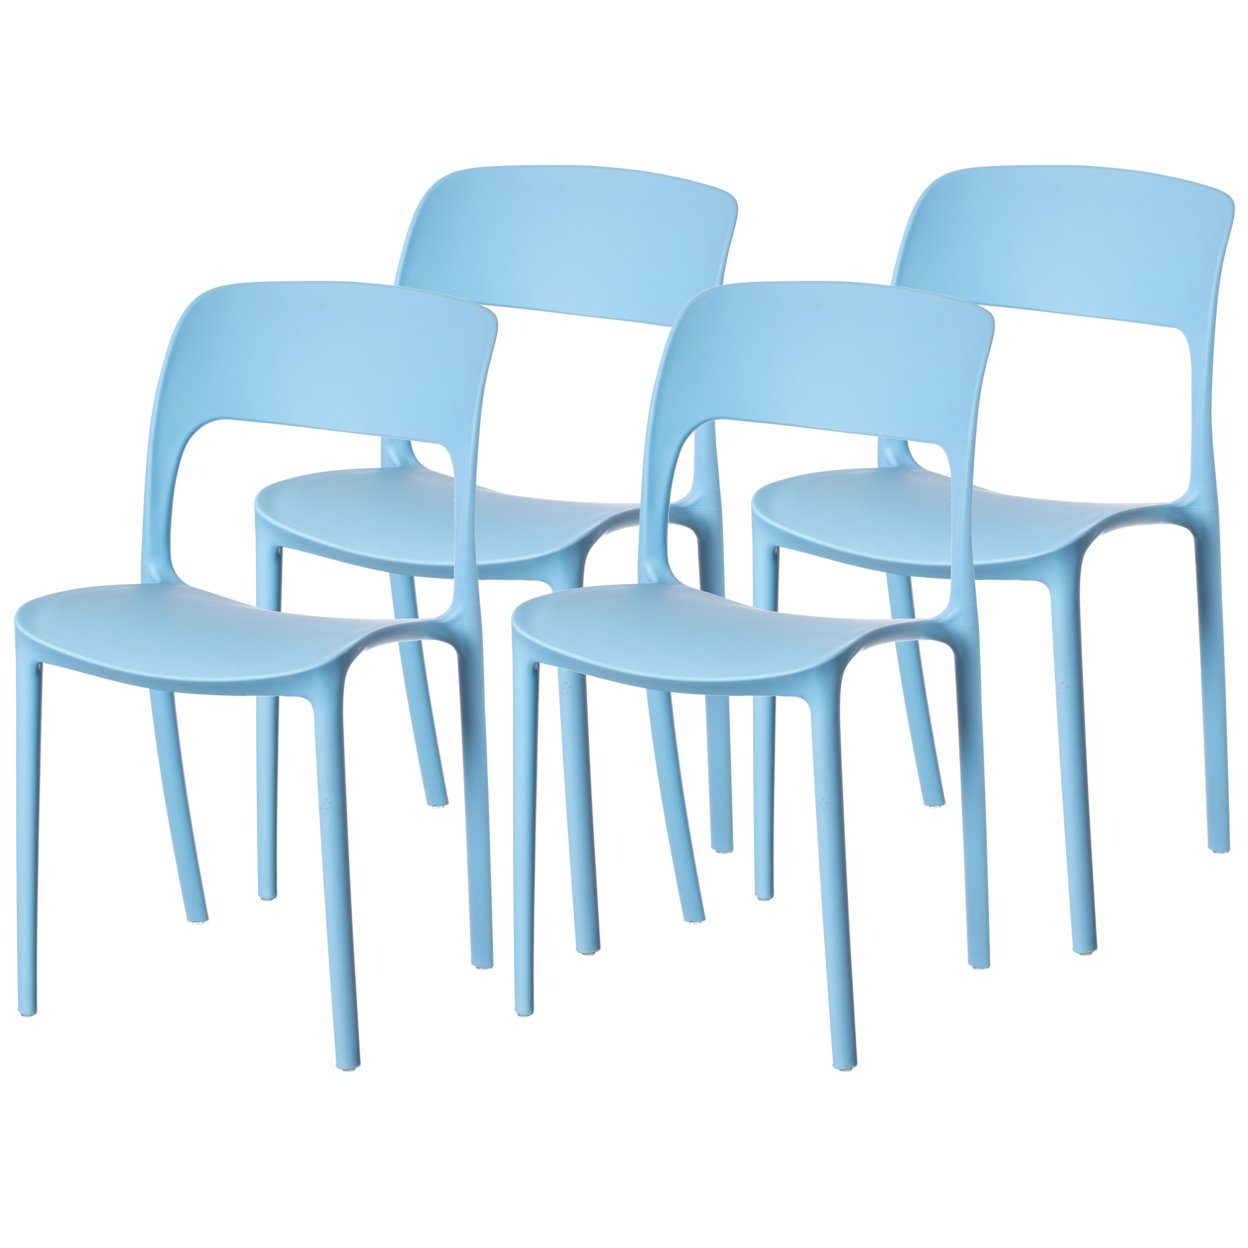 Modern Plastic Outdoor Dining Chair With Open Curved Back - Set Of 4 Blue